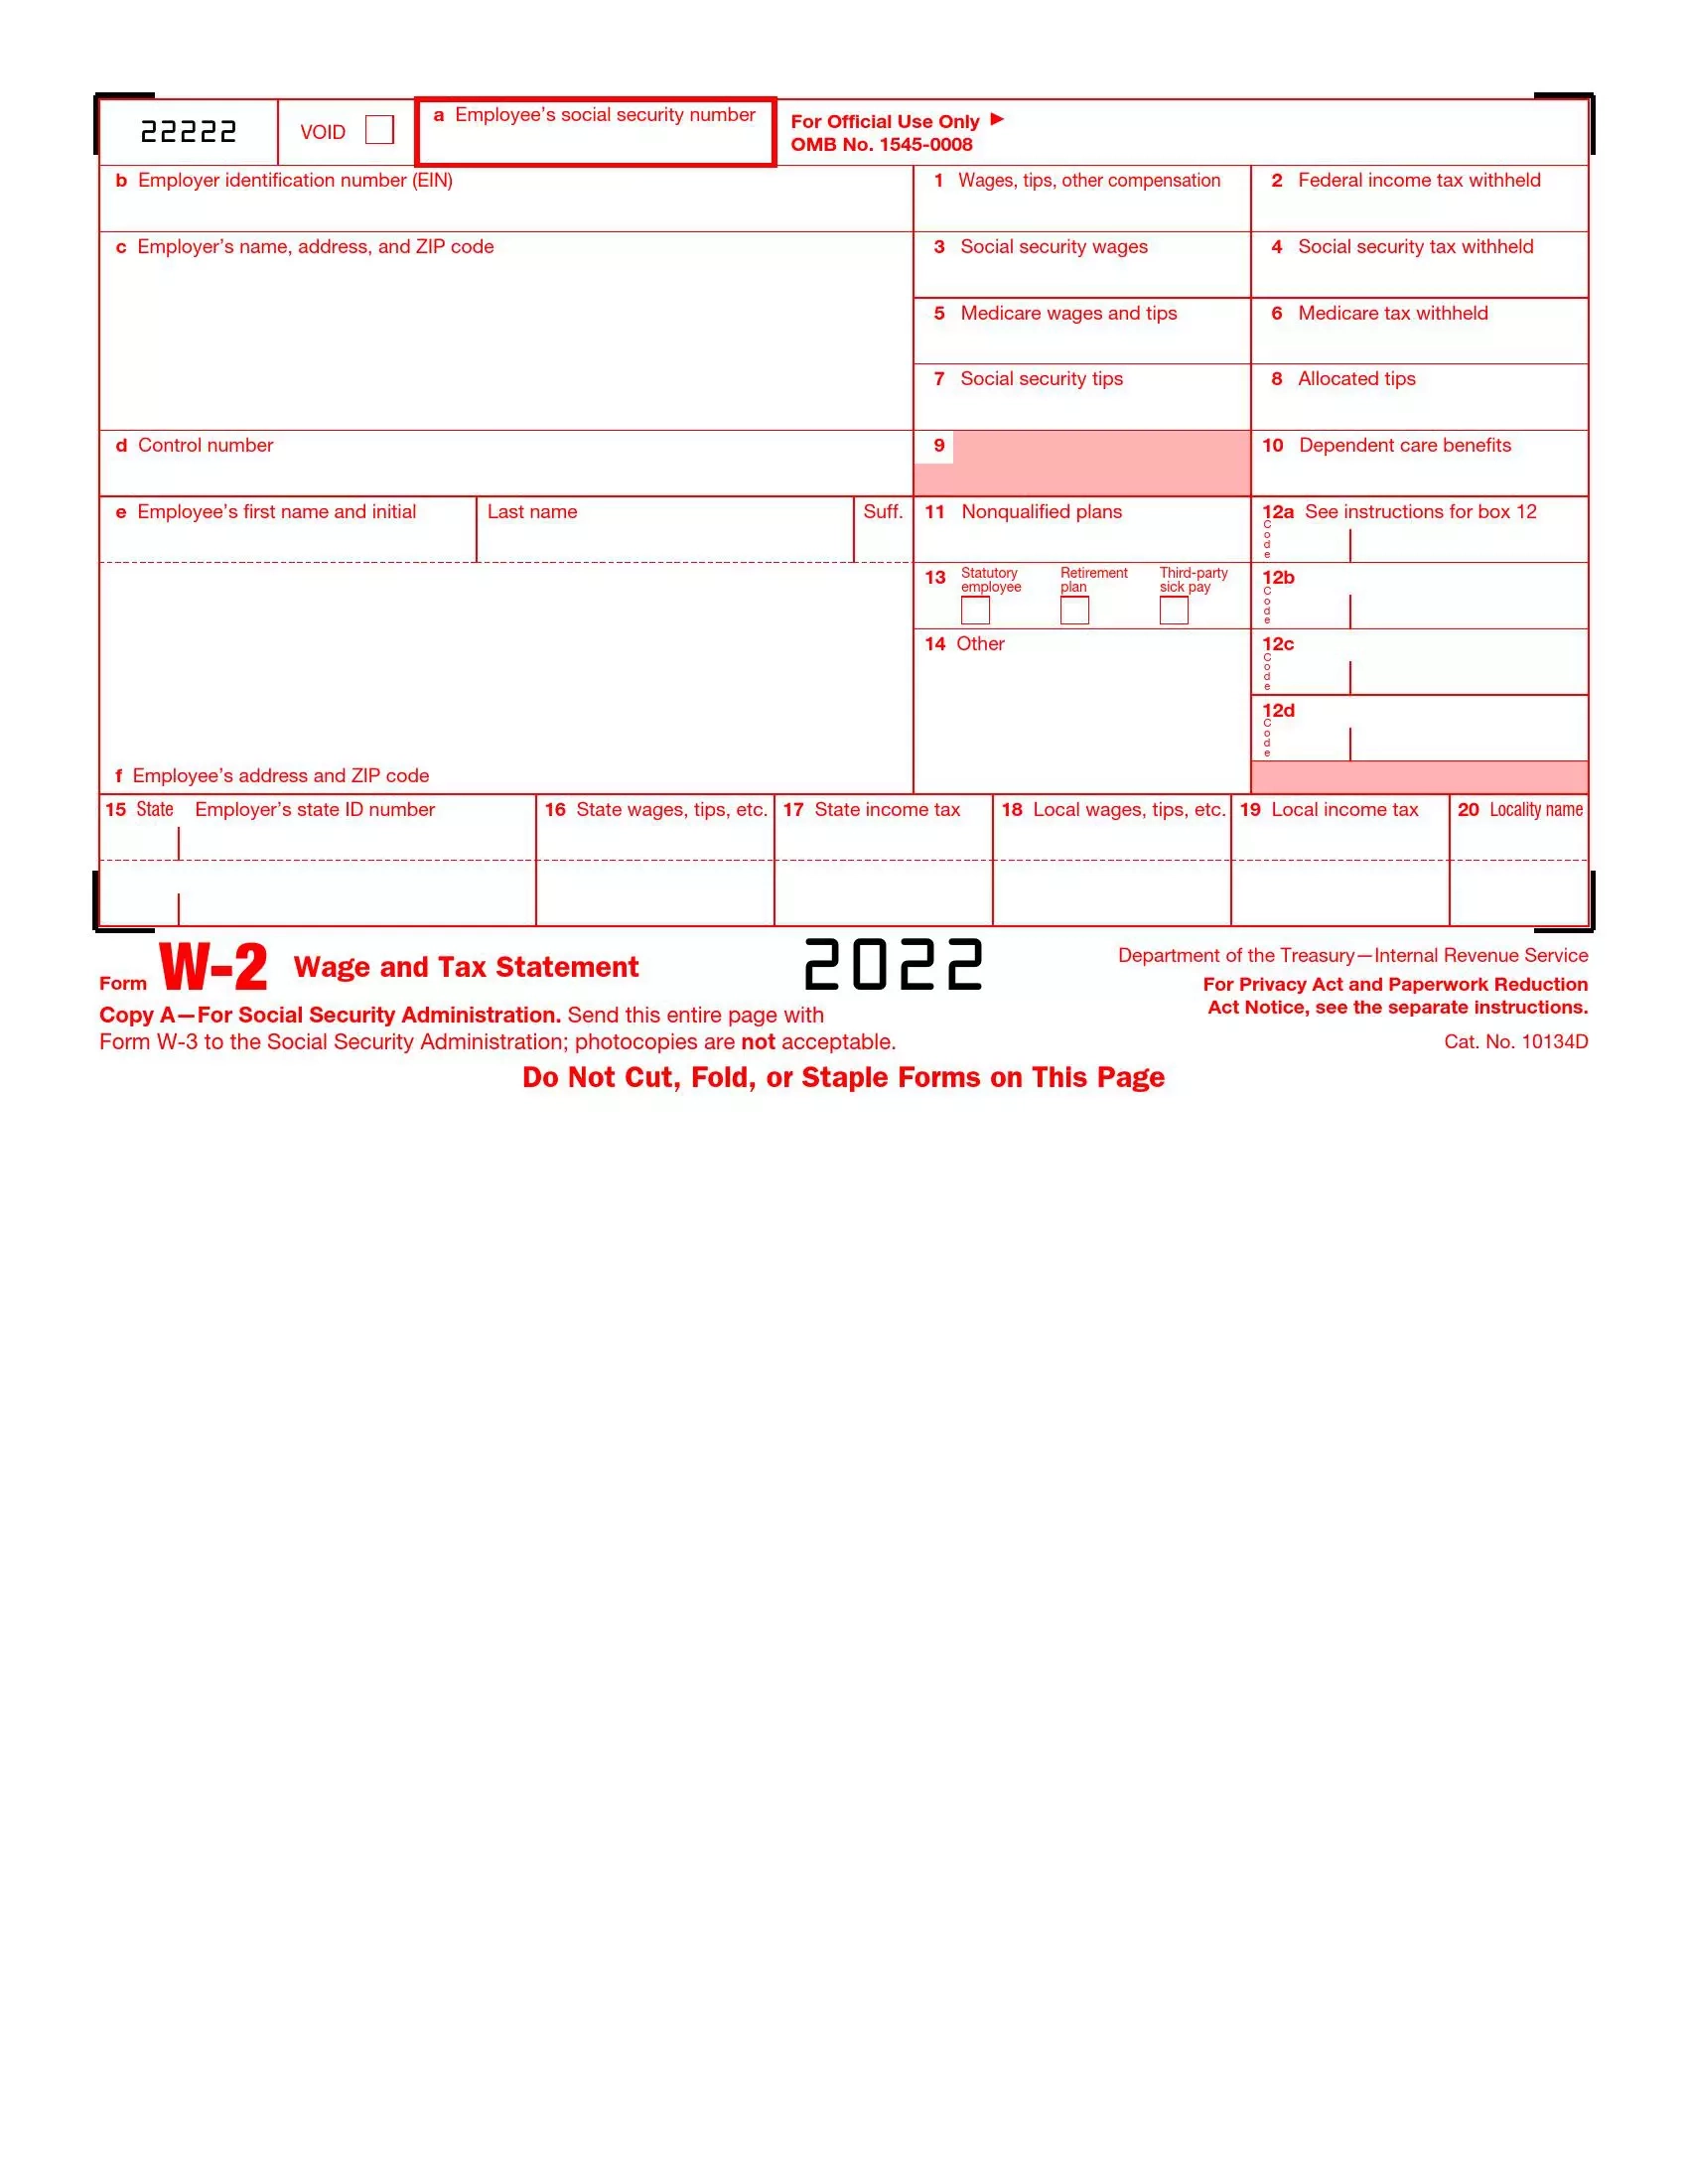 Irs Form W-2 ≡ Fill Out Printable Pdf Forms Online regarding Download W2 Form Online